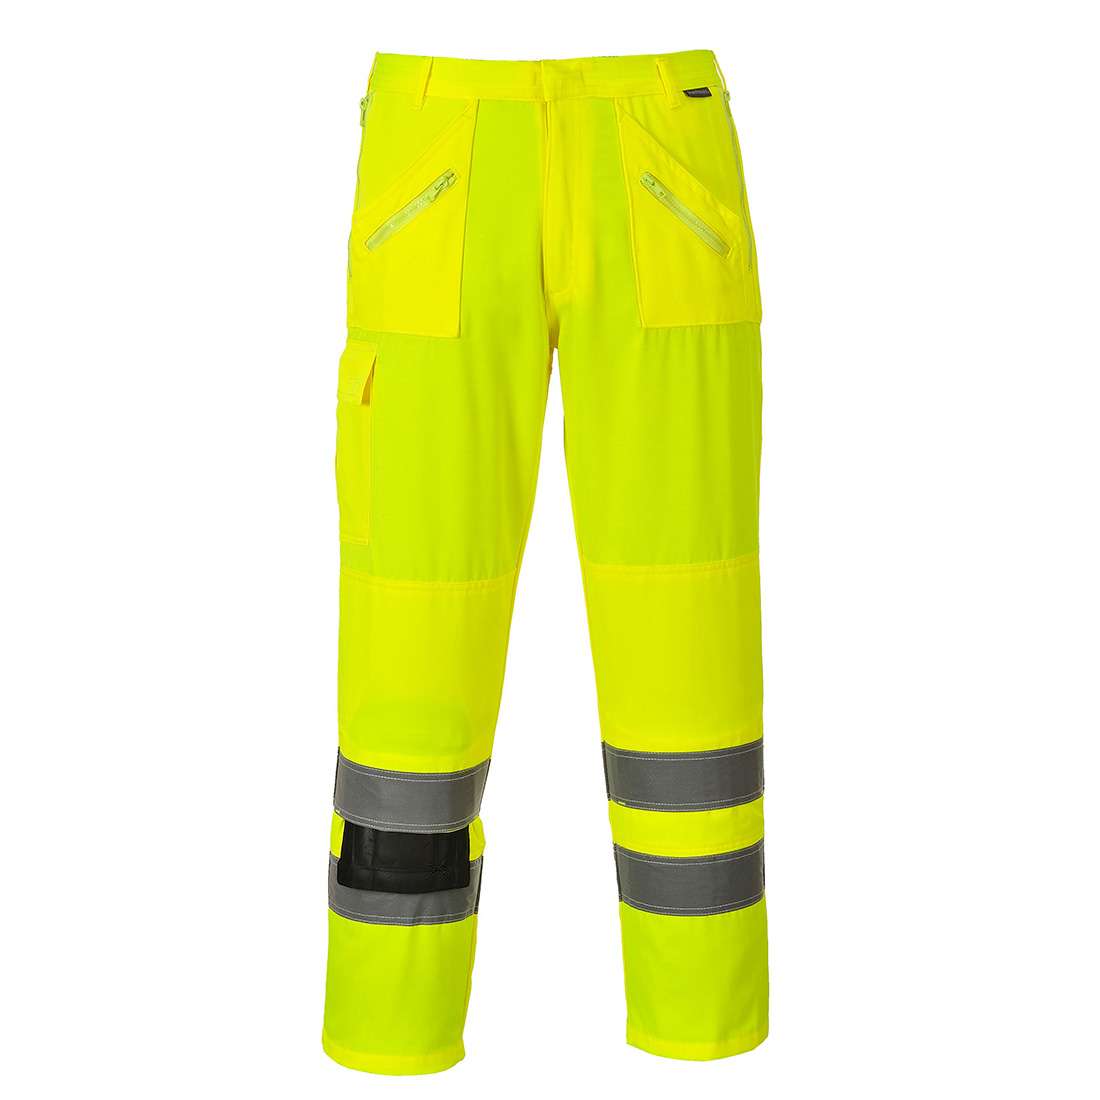 Portwest High Visibility Action Work Trousers E061